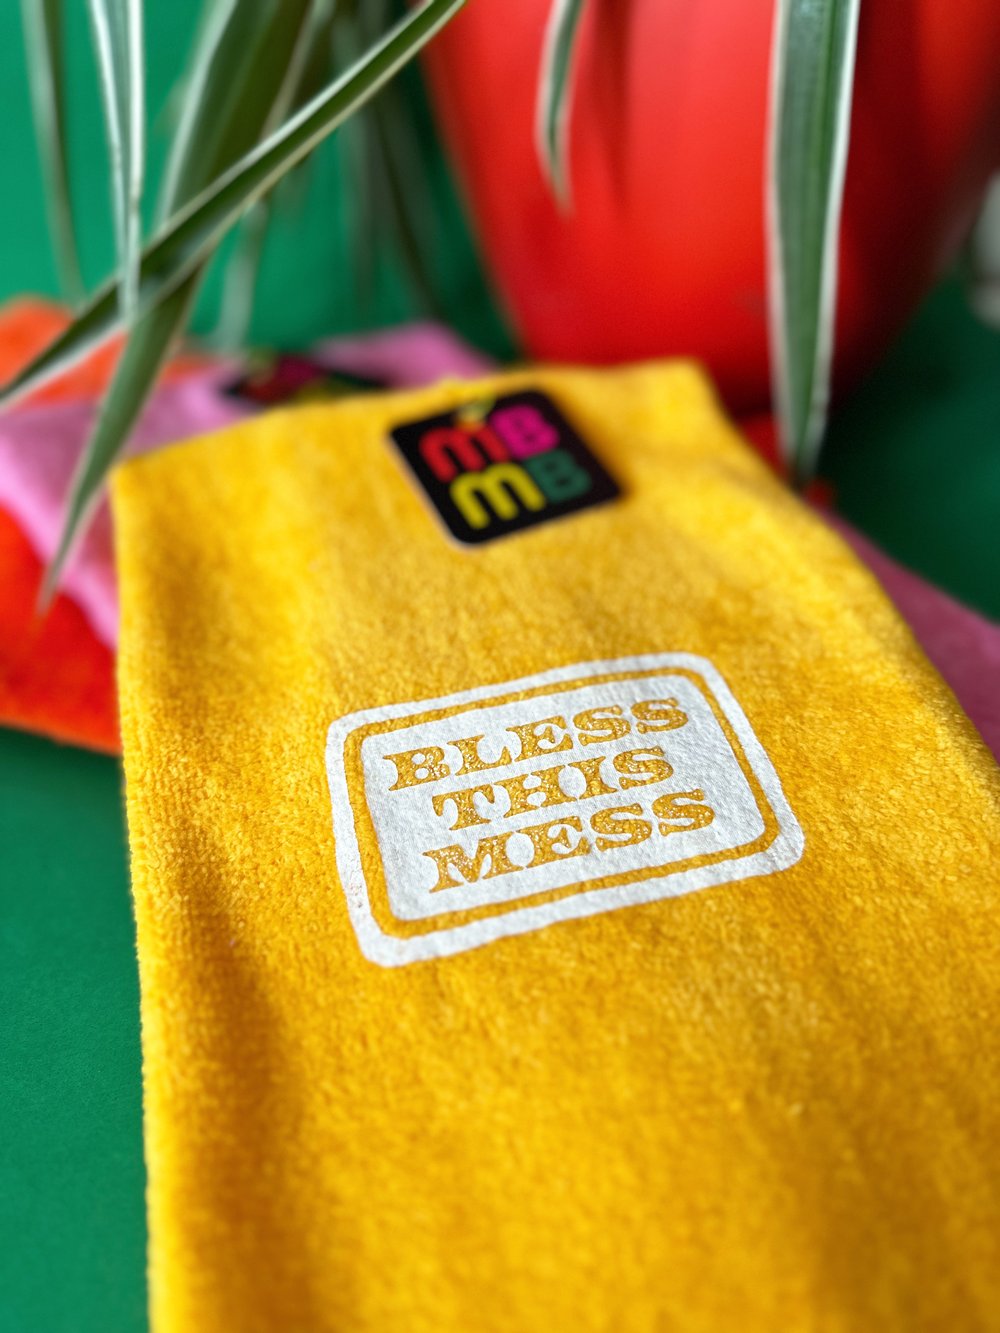 Bless This Mess - Hand Towel - Kitchen or Bath